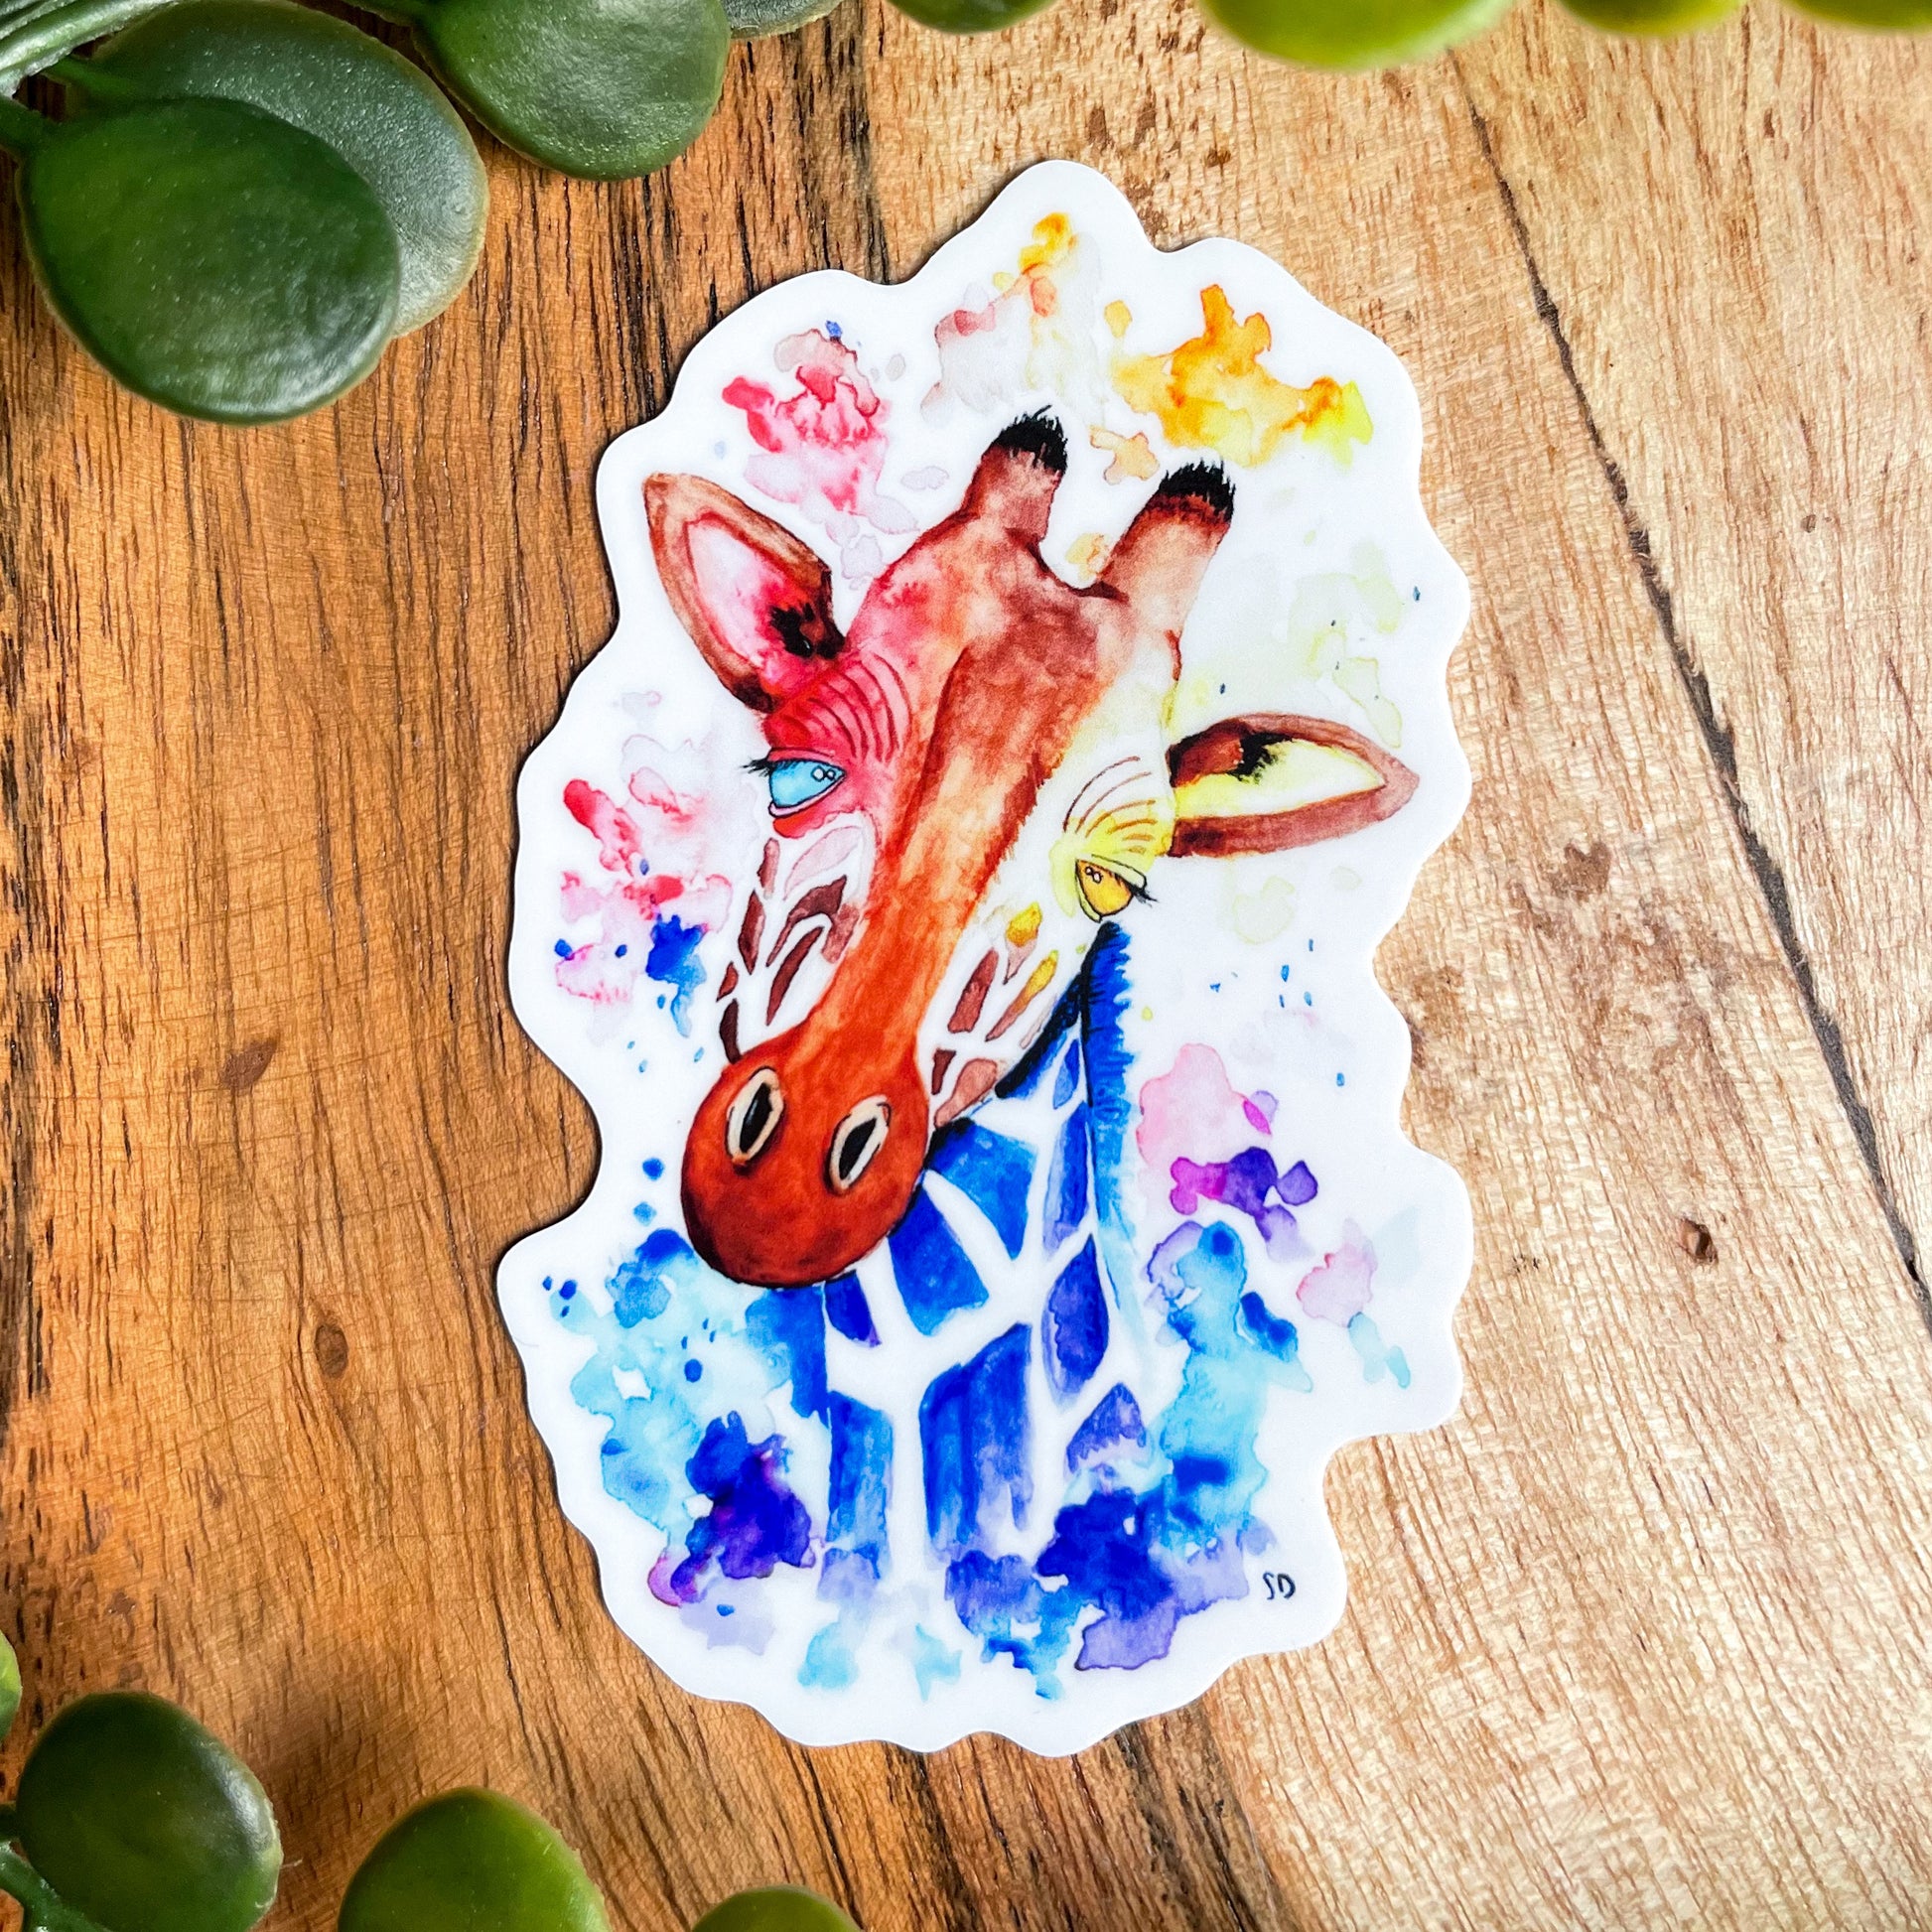 A close-up image of the waterproof, vinyl, dye-cut sticker depicting a watercolor painting from the Wild Planet Creations wild animal collection of a giraffe.